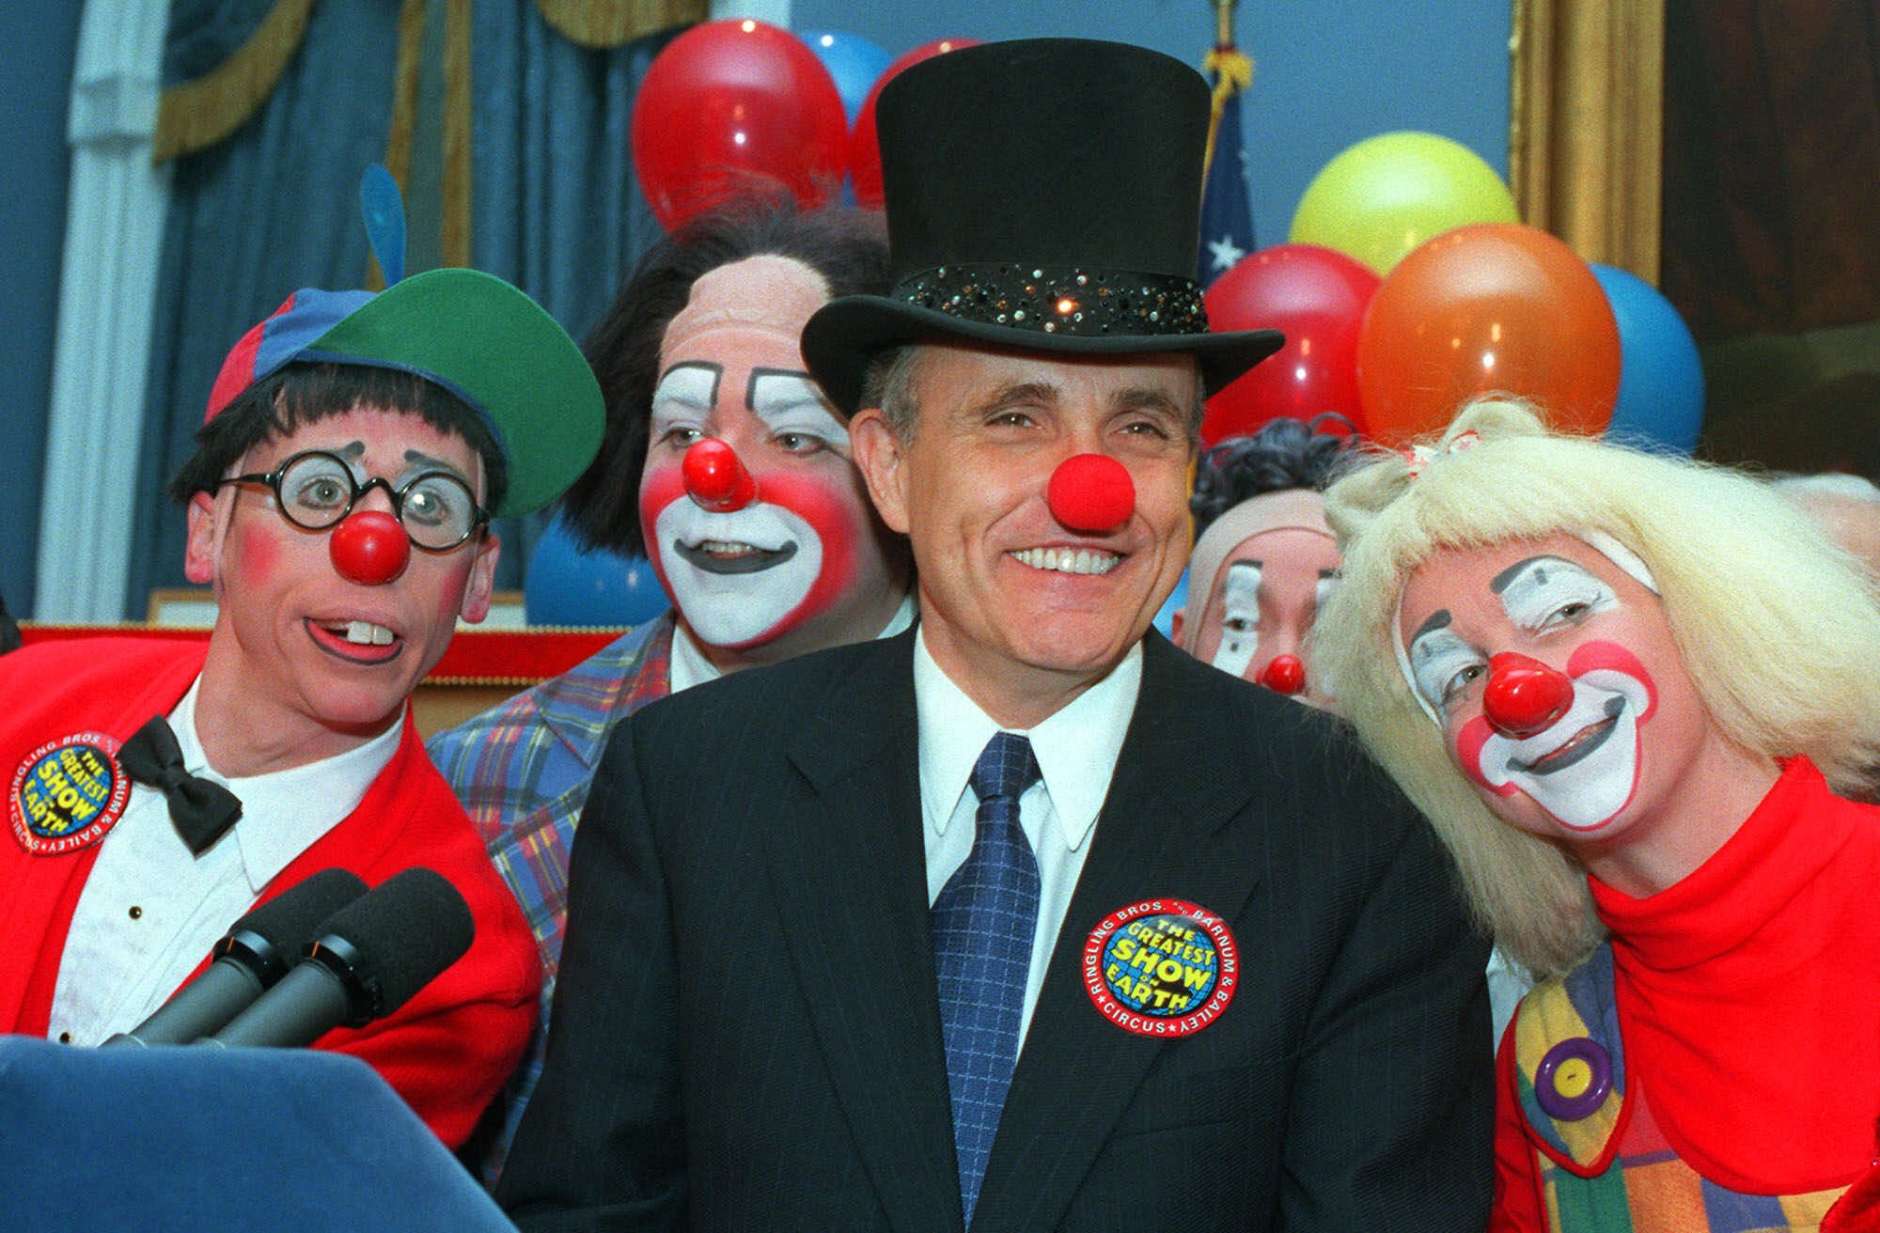 New York City Mayor Rudolph W. Giuliani, center, doffed with a red clown nose and ringmaster's top hat, is joined by Ringling Brothers Barnum and Bailey Circus clowns Chris Allison, left, and Karen DeSanto, right, at City Hall Tuesday, Feb. 23, 1999, in New York.  (AP Photo/Marty Lederhandler)